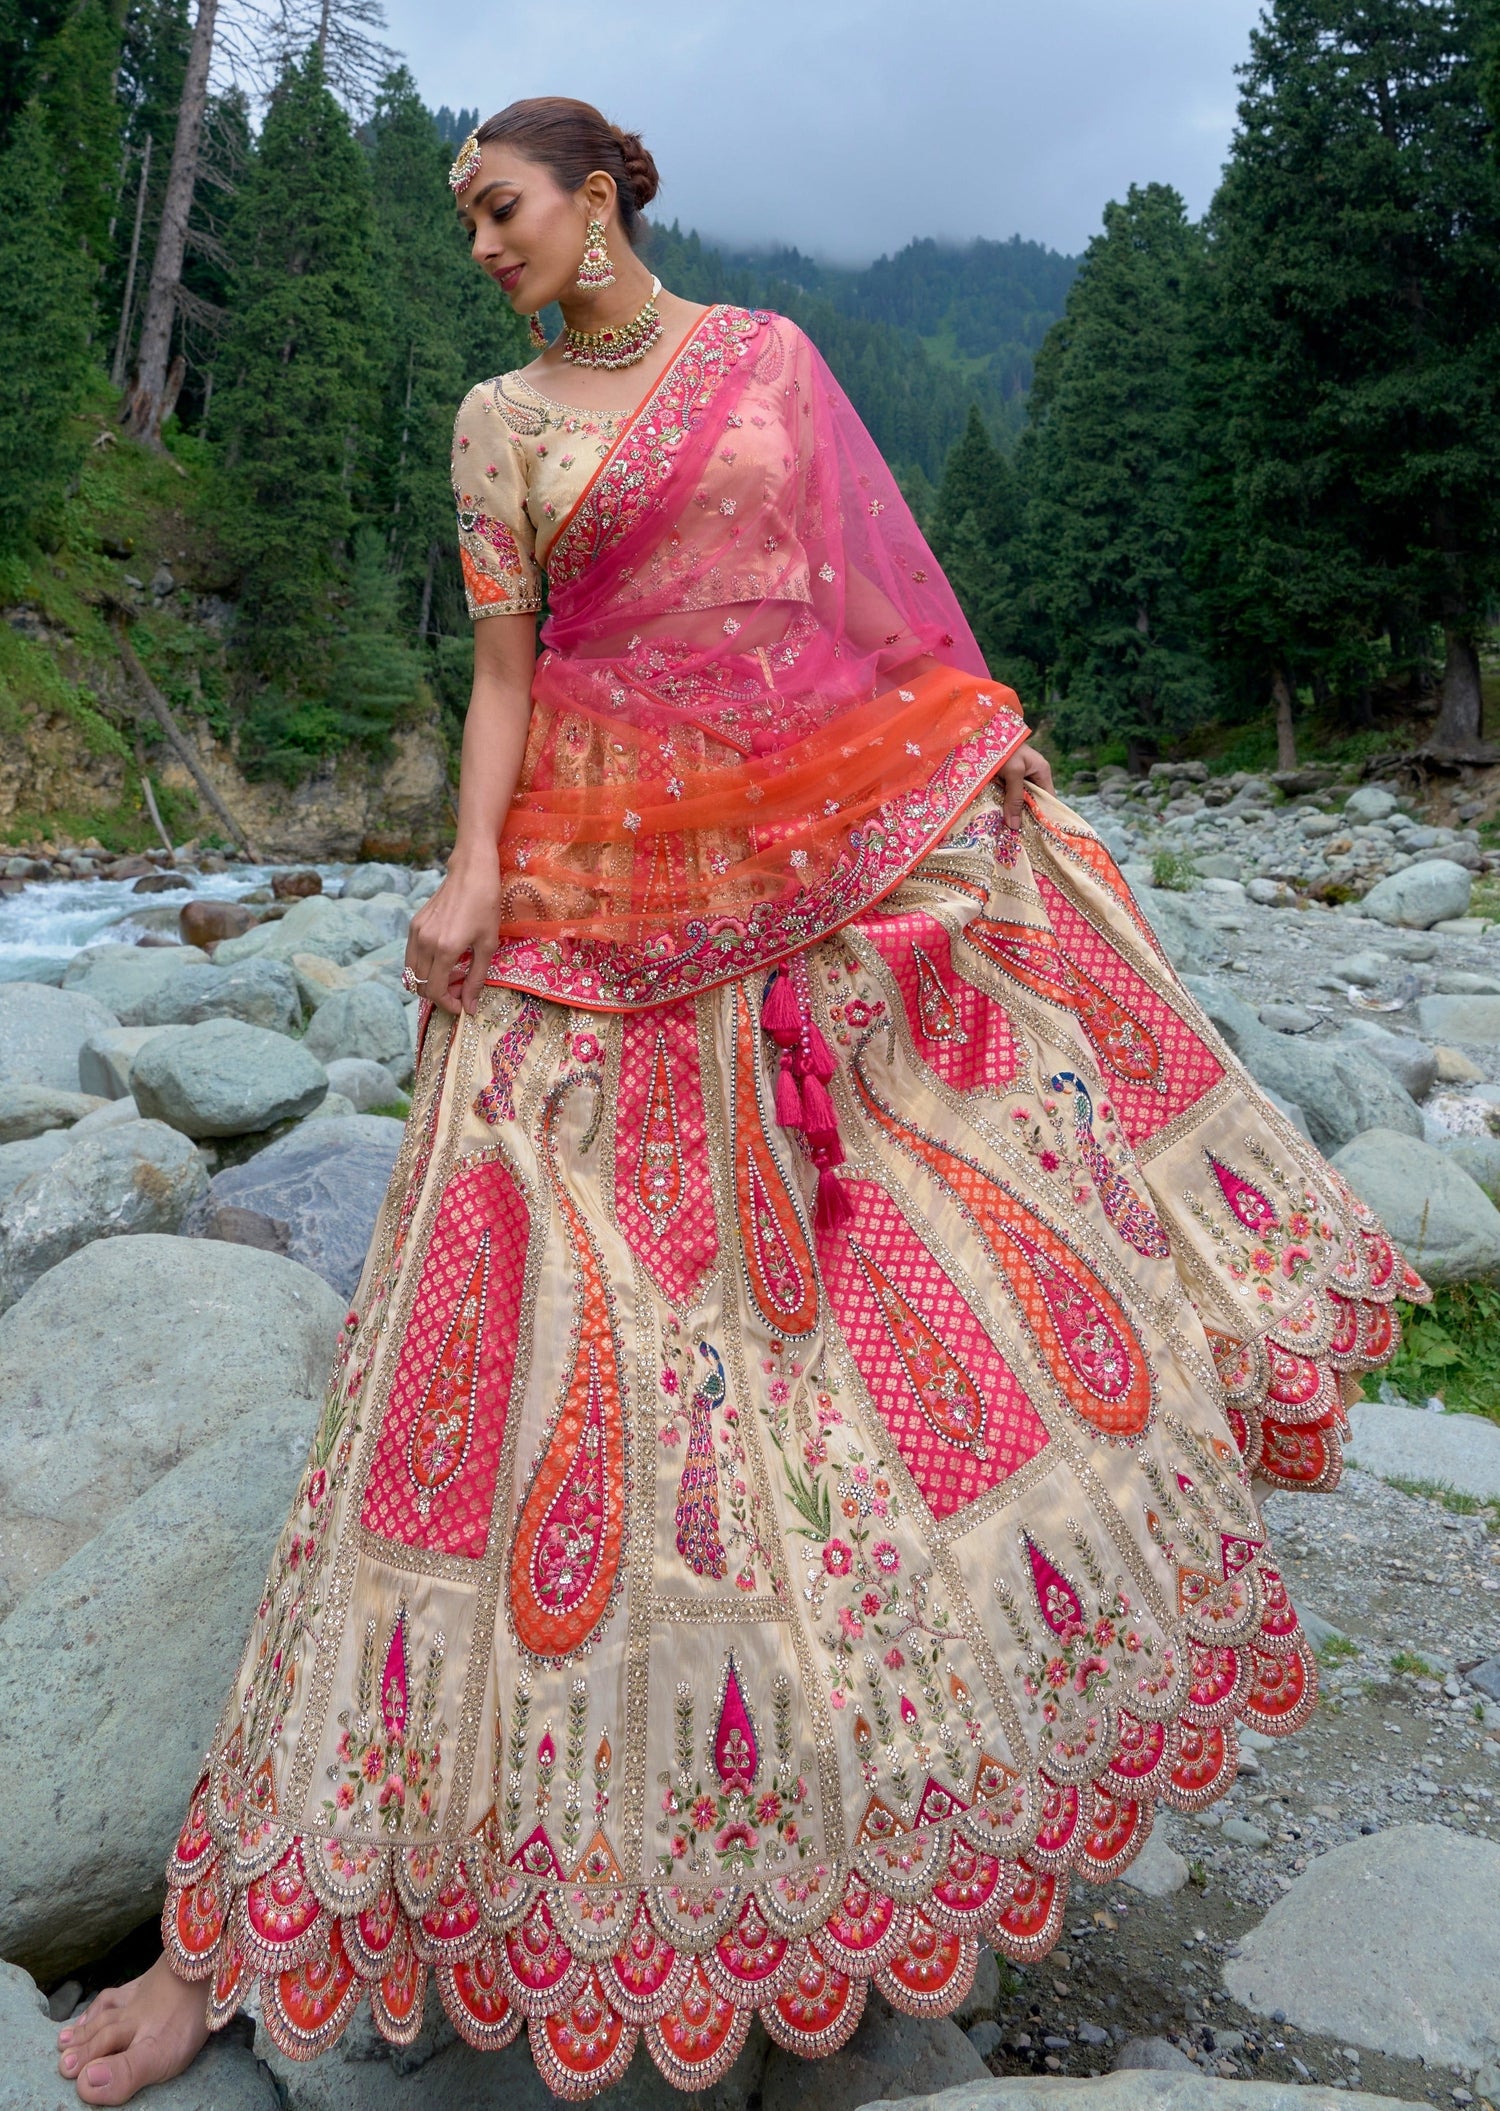 Off-White Color panelled Wedding Lehenga With Thread And Foil Mirror Work